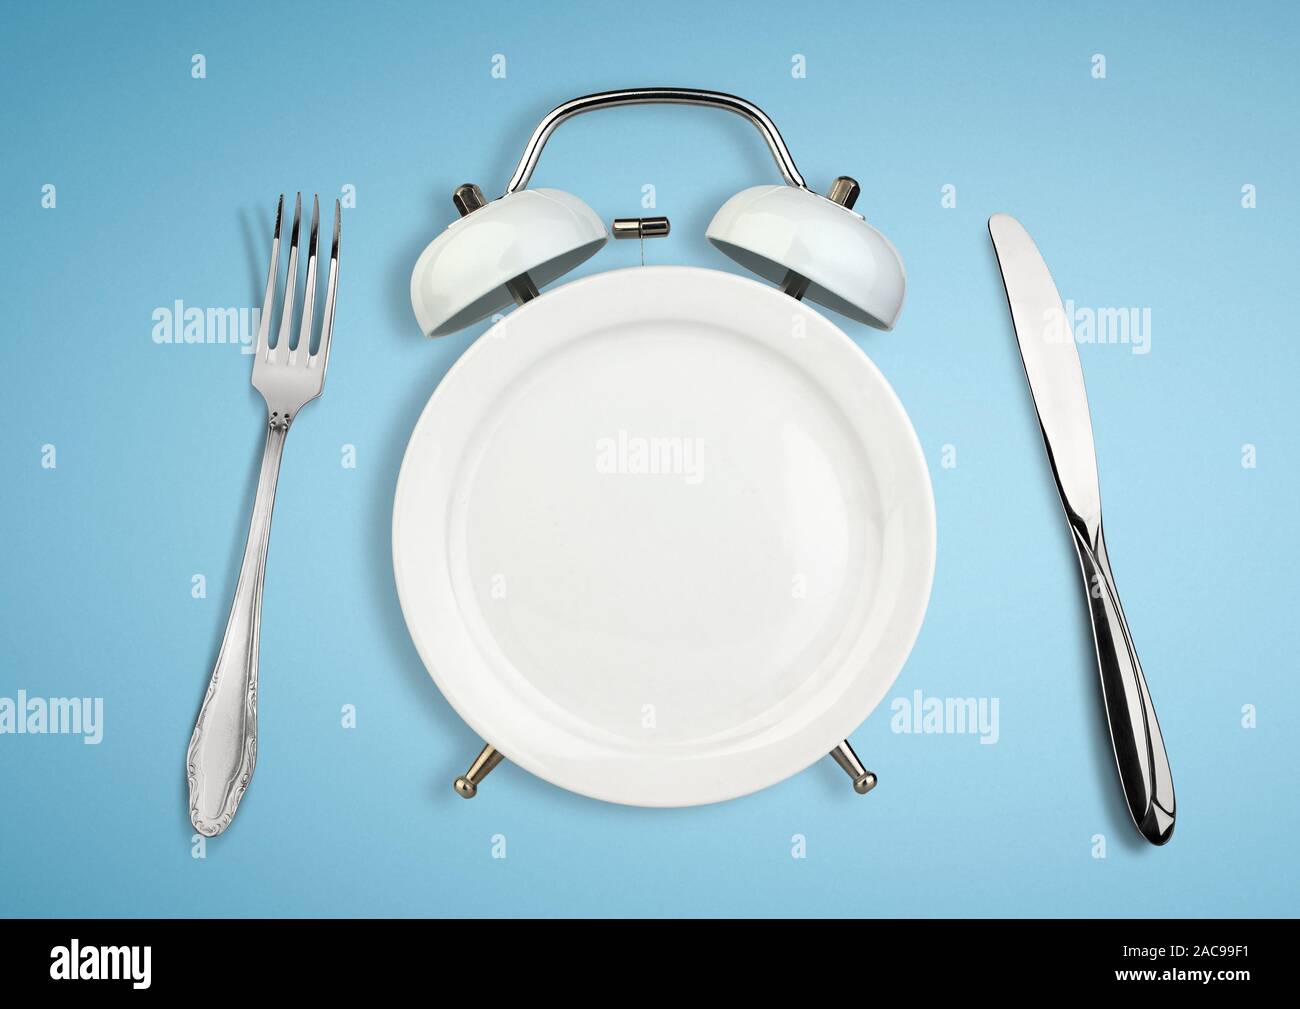 Concept of intermittent fasting, diet and weight loss. Plate as Alarm clock on blue Stock Photo